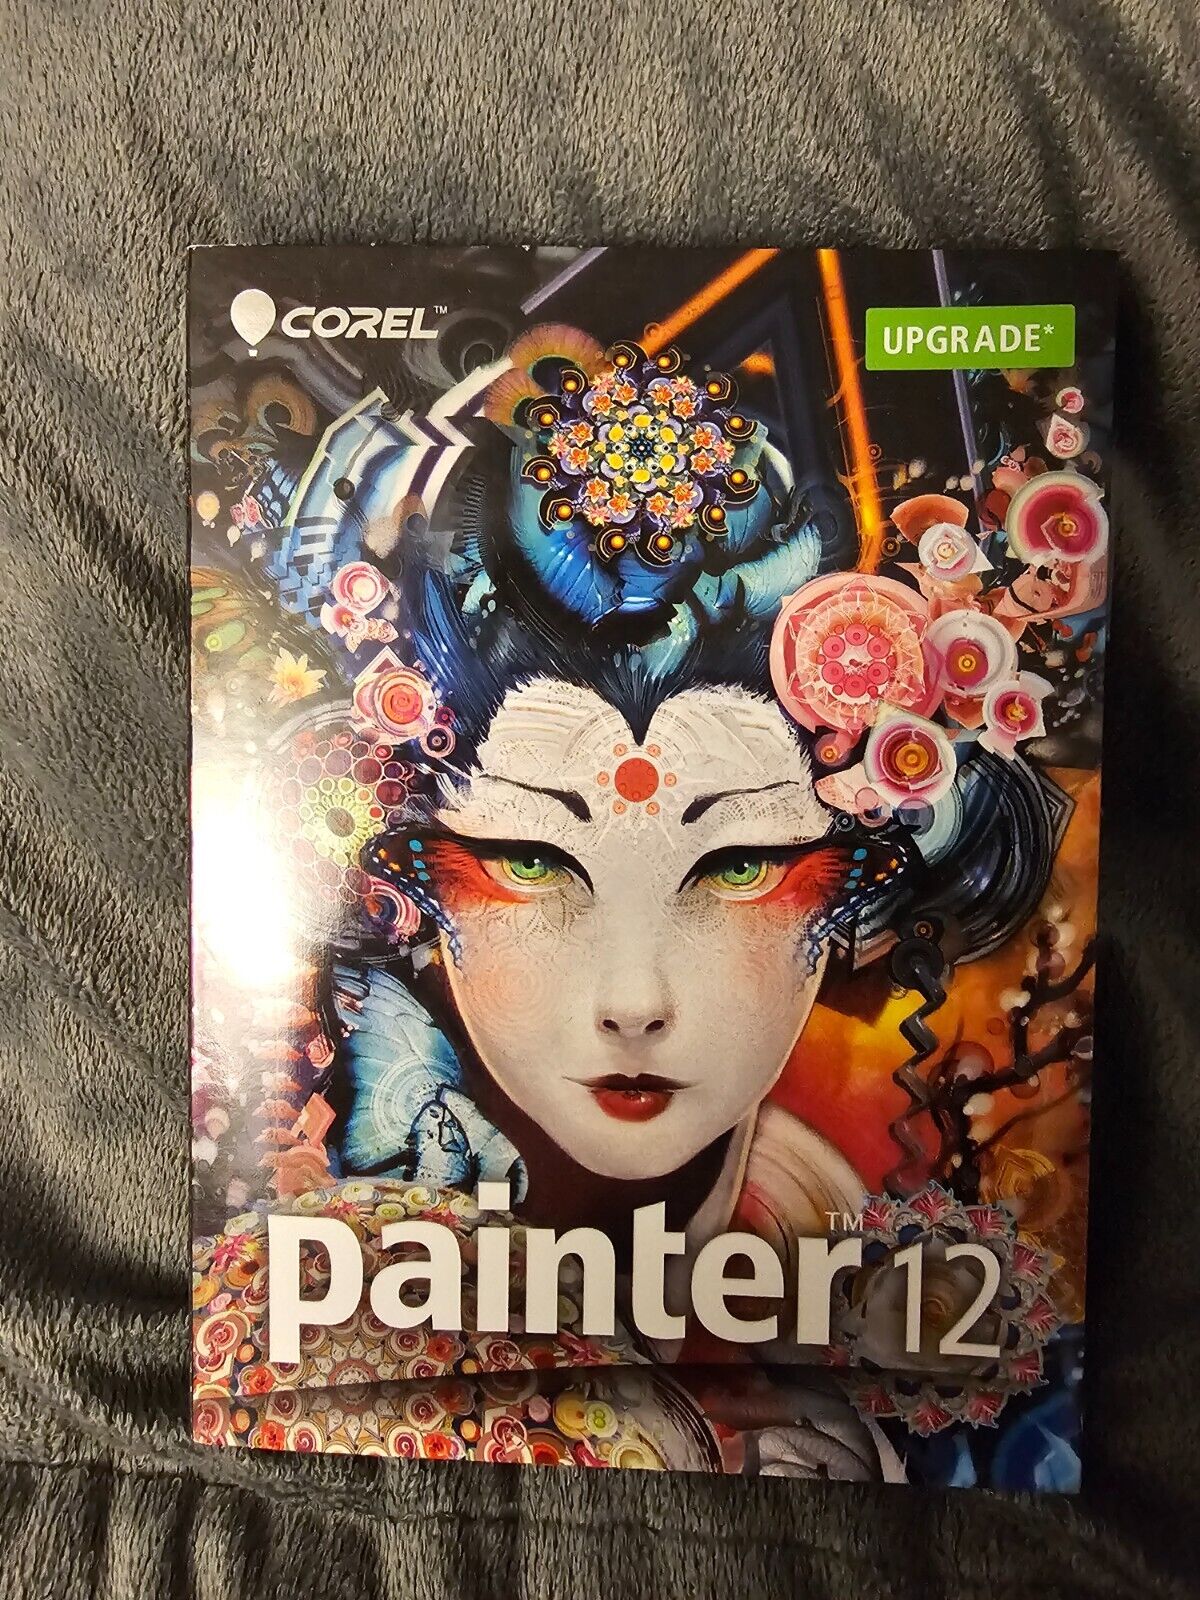 Corel Painter 12 by Corel *UPGRADE* Software W/Getting Started Guide Windows/Mac